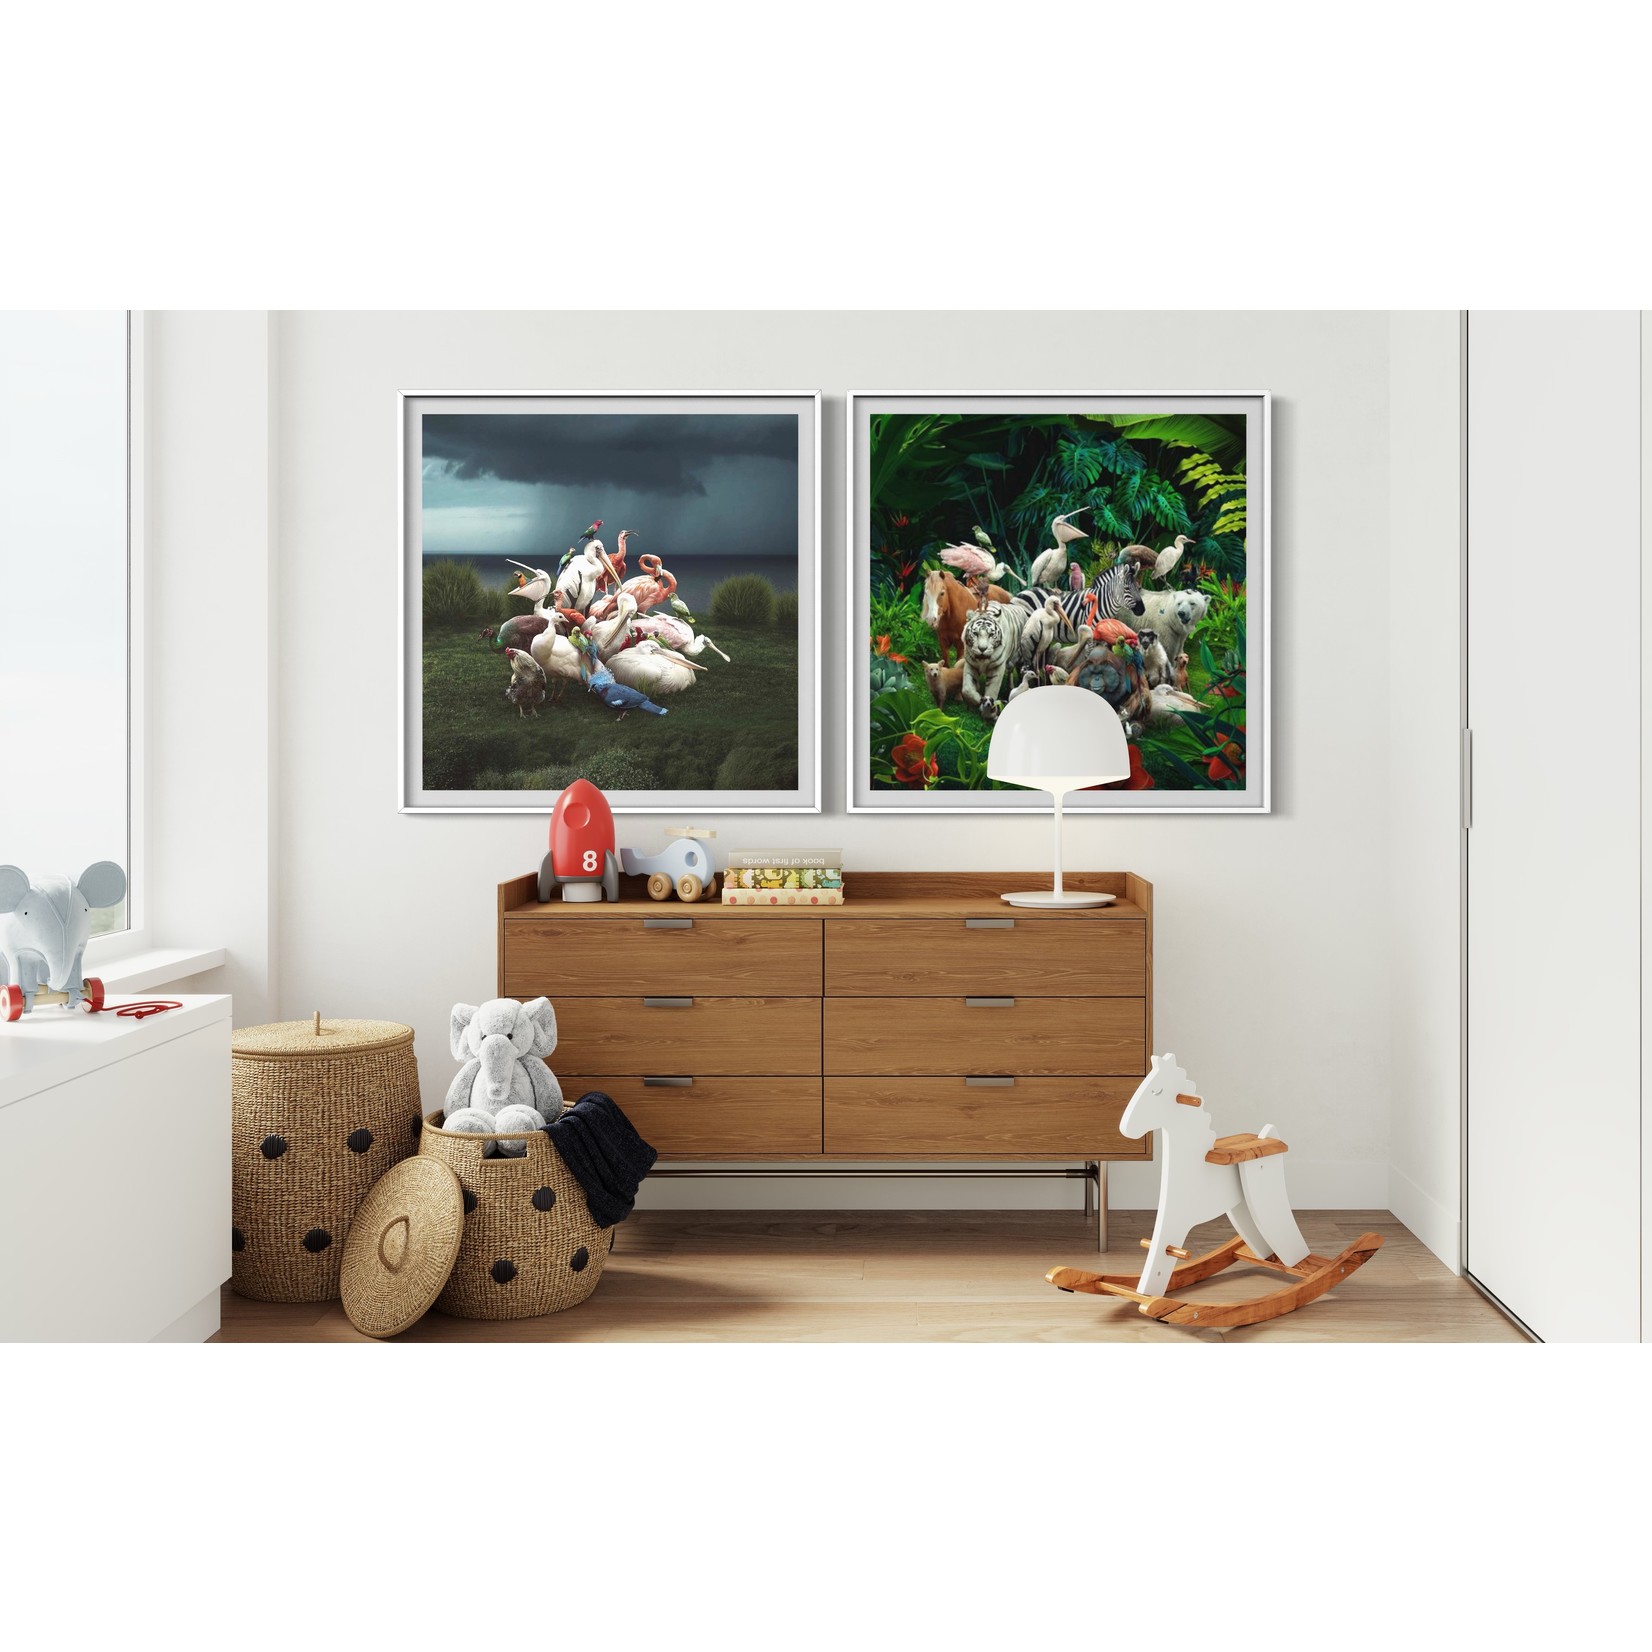 Framed Print on Rag Paper Big family in the forest by Vizerskaya via Getty Images Gallery